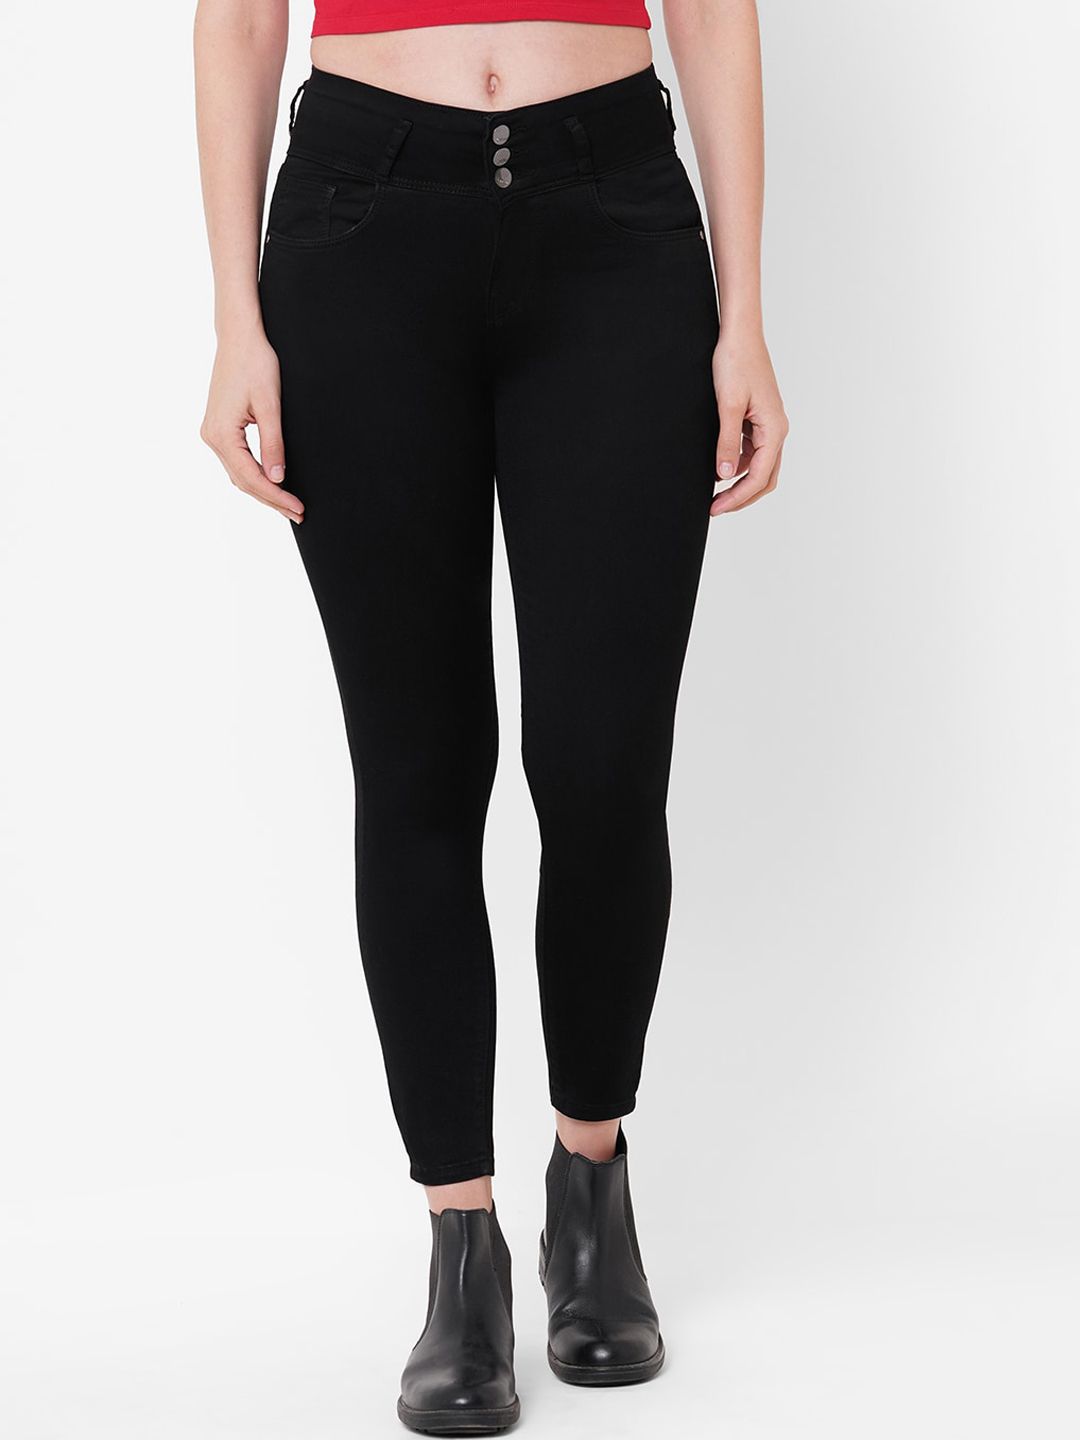 Kraus Jeans Women Black Skinny Fit High-Rise Cropped Jeans Price in India